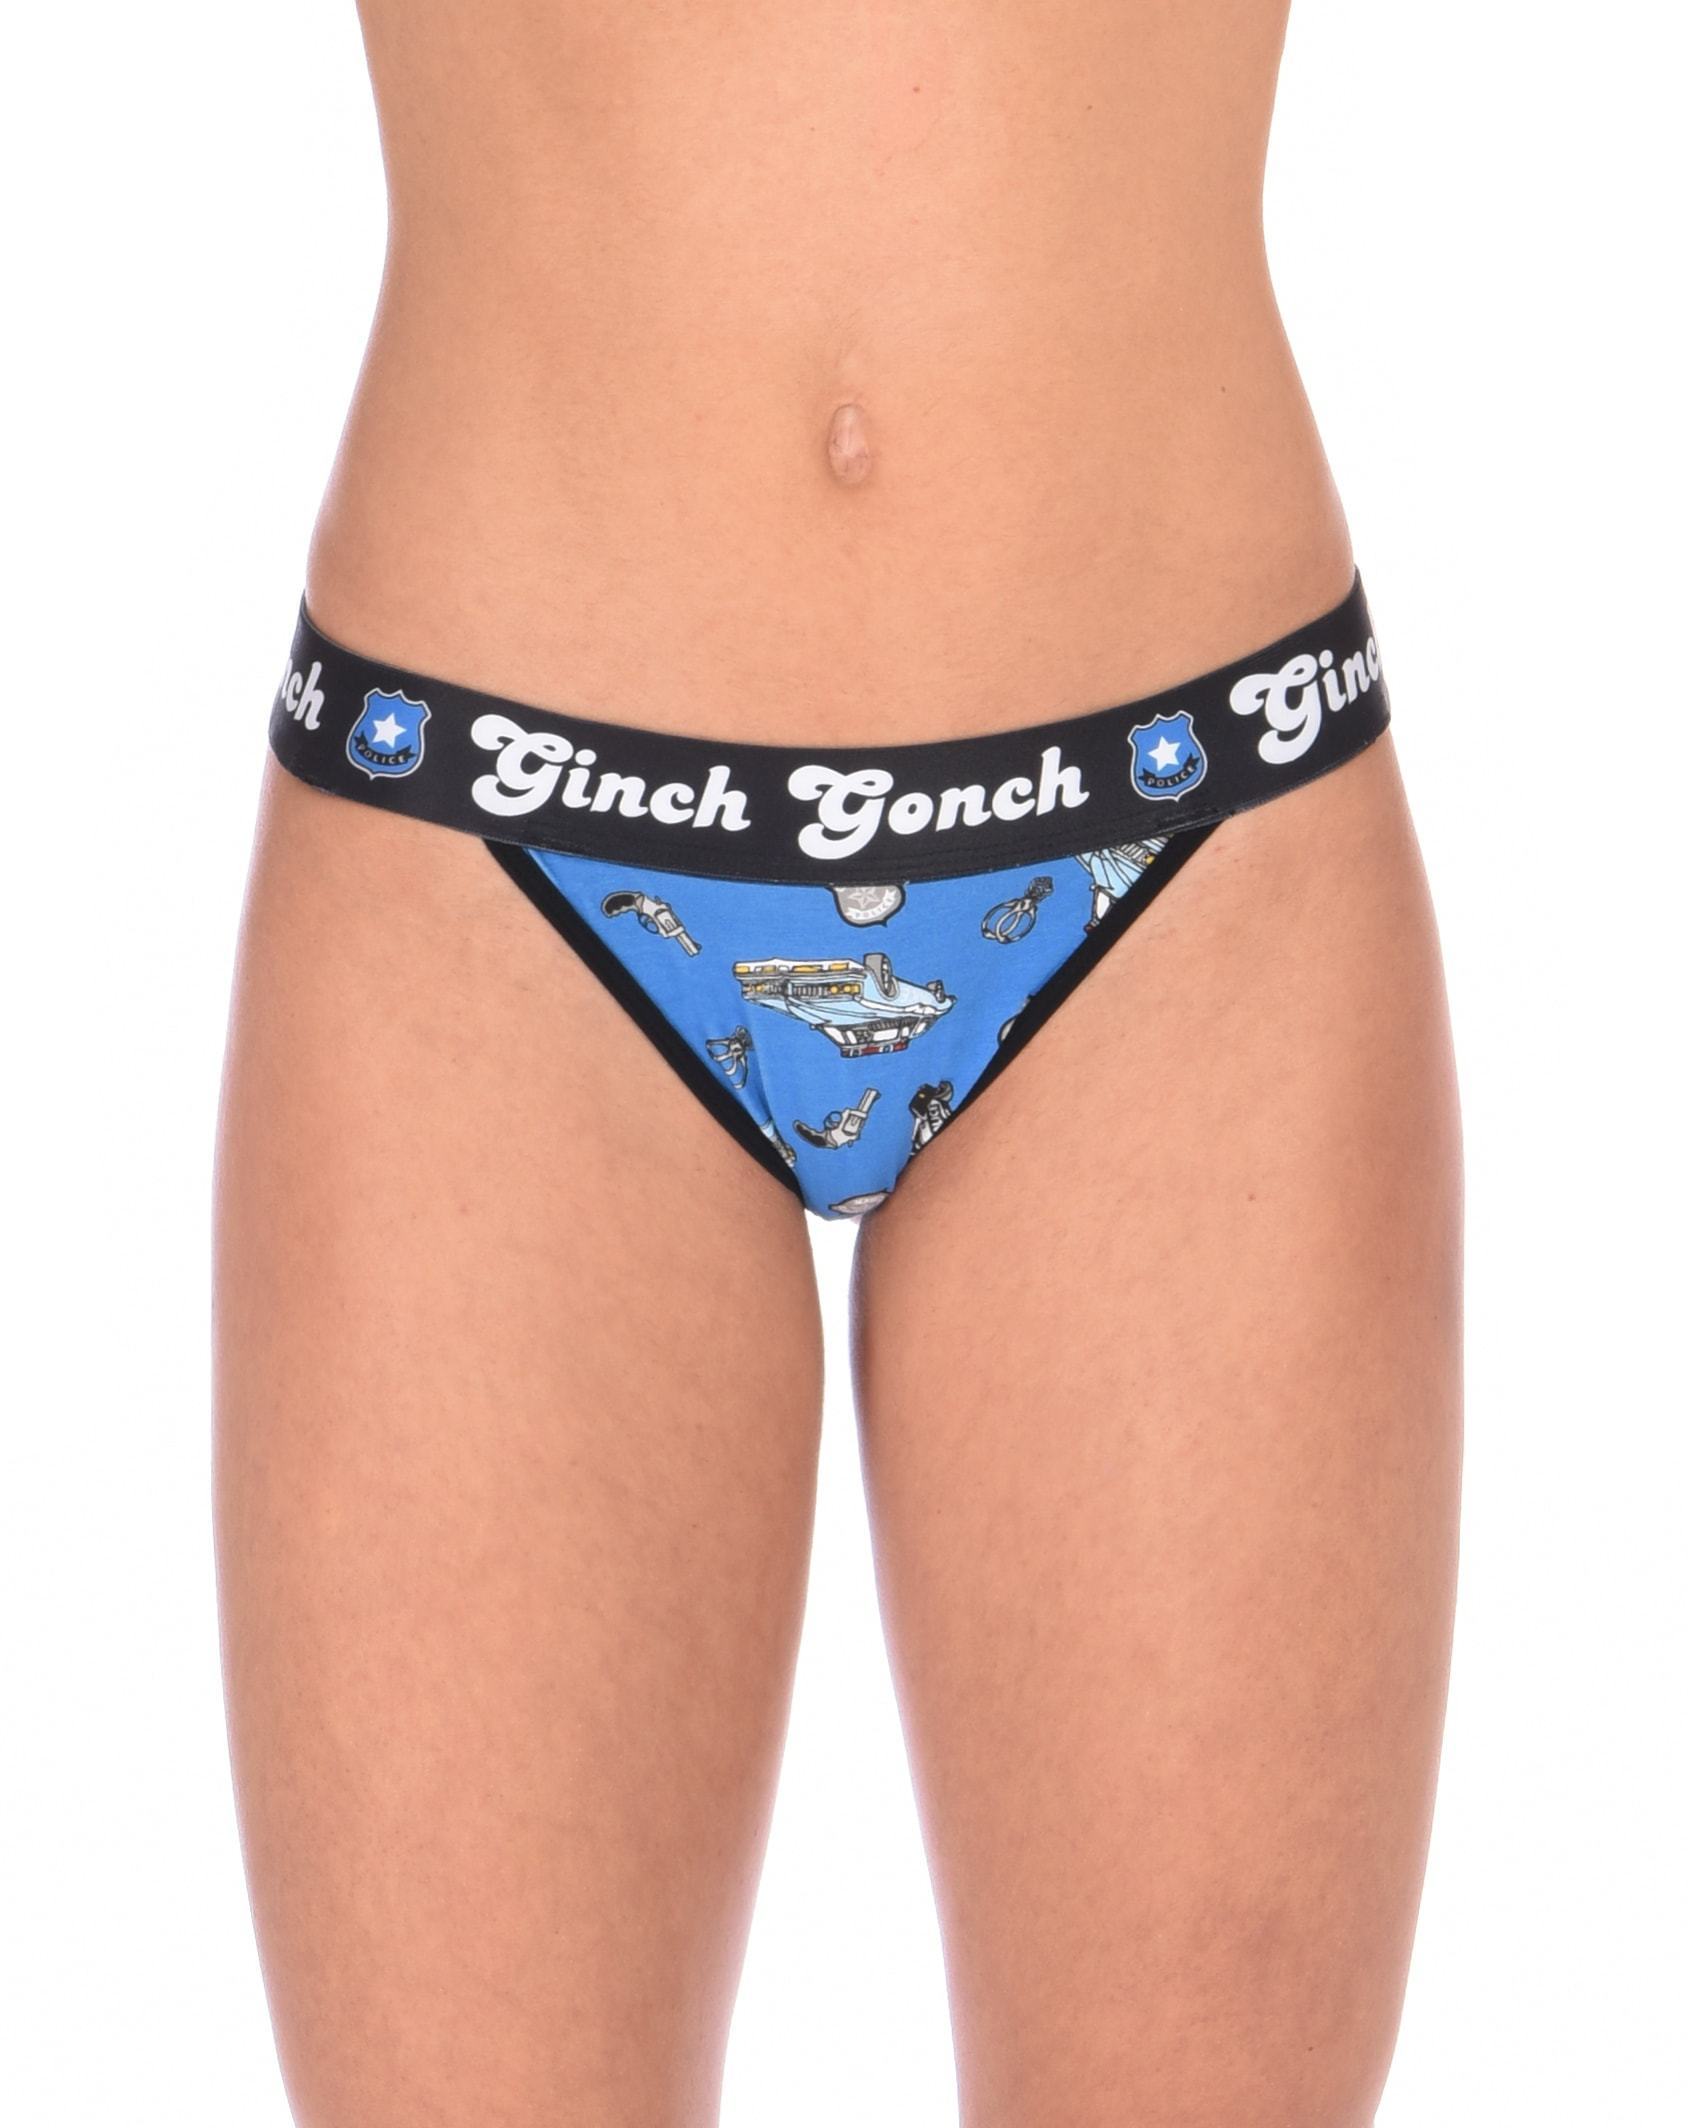 Ginch Gonch GG Patrol thong women's underwear blue fabric with cop cars, badges, hand cuffs, and guns. Black trim and black printed waistband front. 